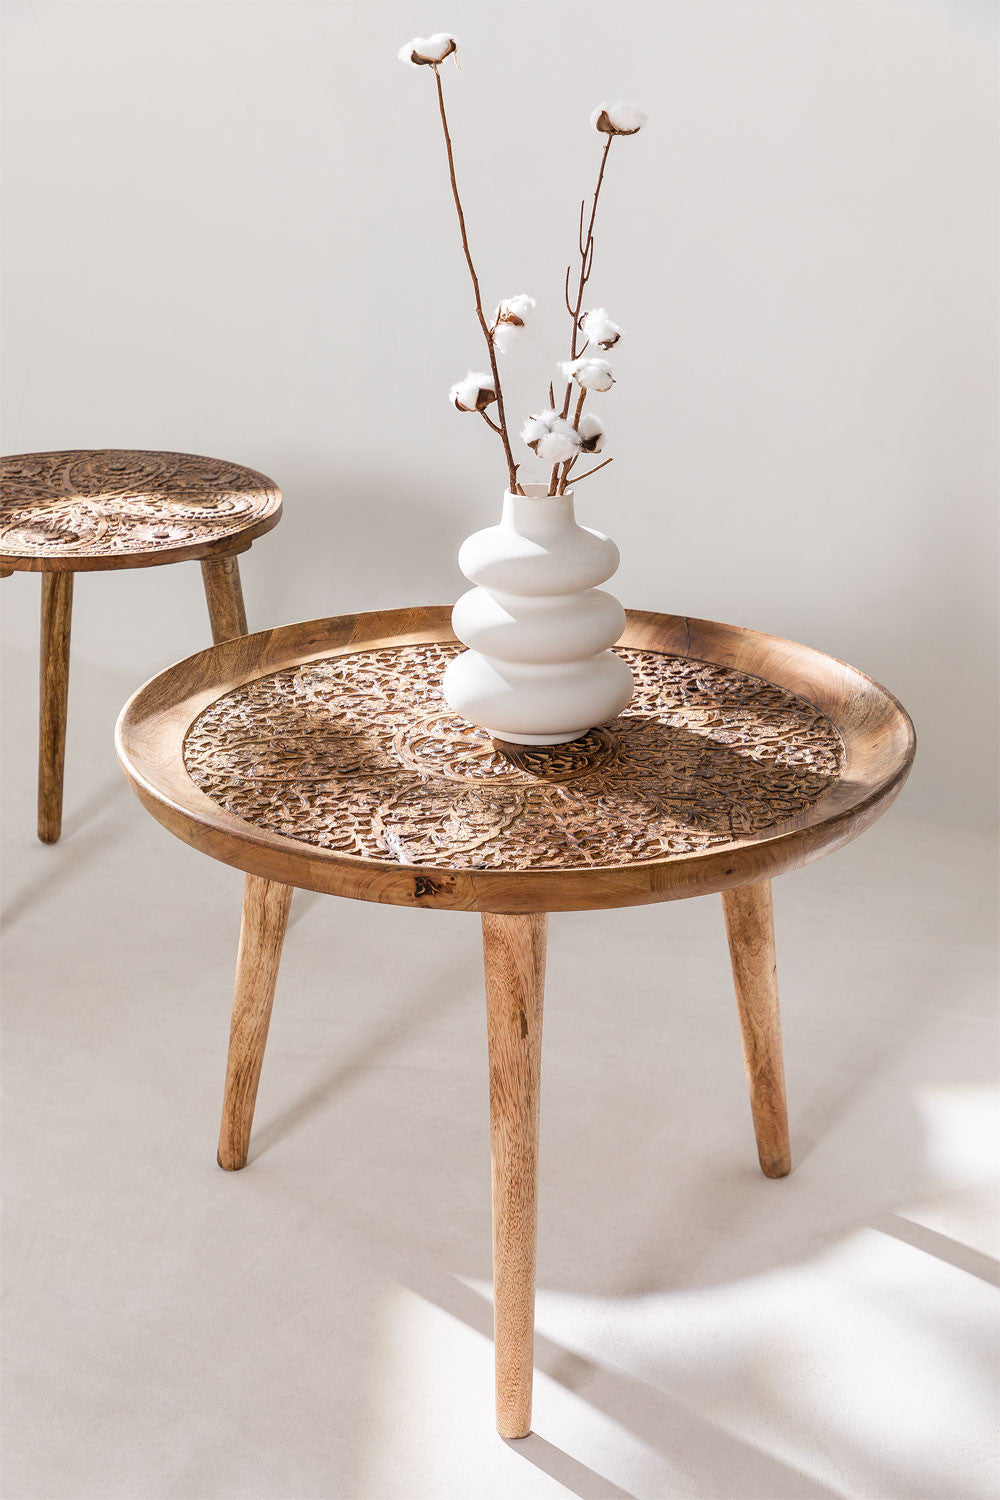 Handmade Nature's Elegance: Handcrafted Round Mango Wood Side Table (40 cm) - A Timeless Accent for Your Home